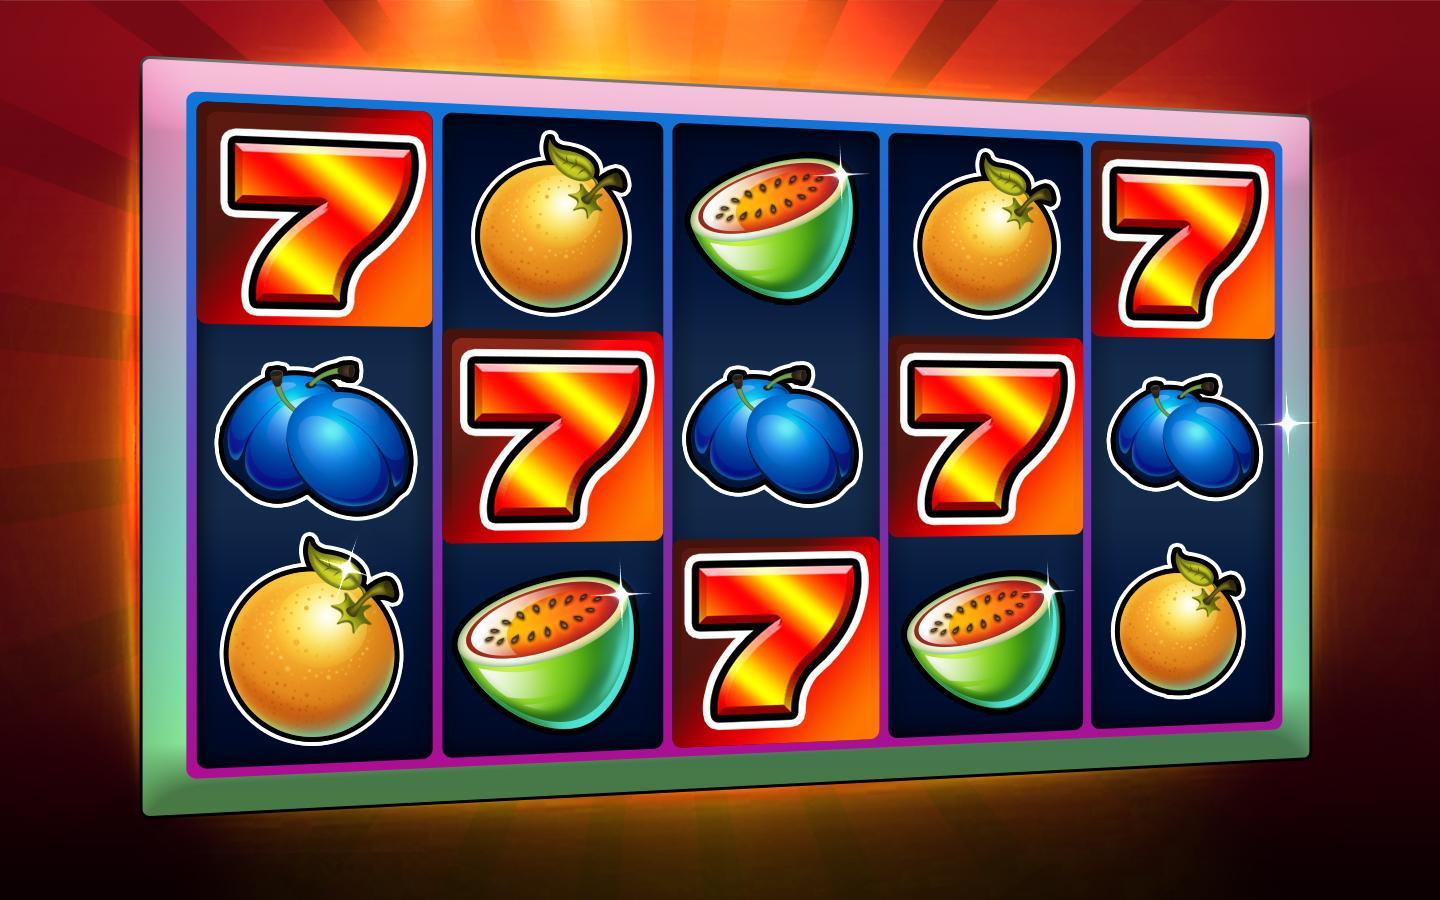 Make your free time enjoyable with the latest slot games online